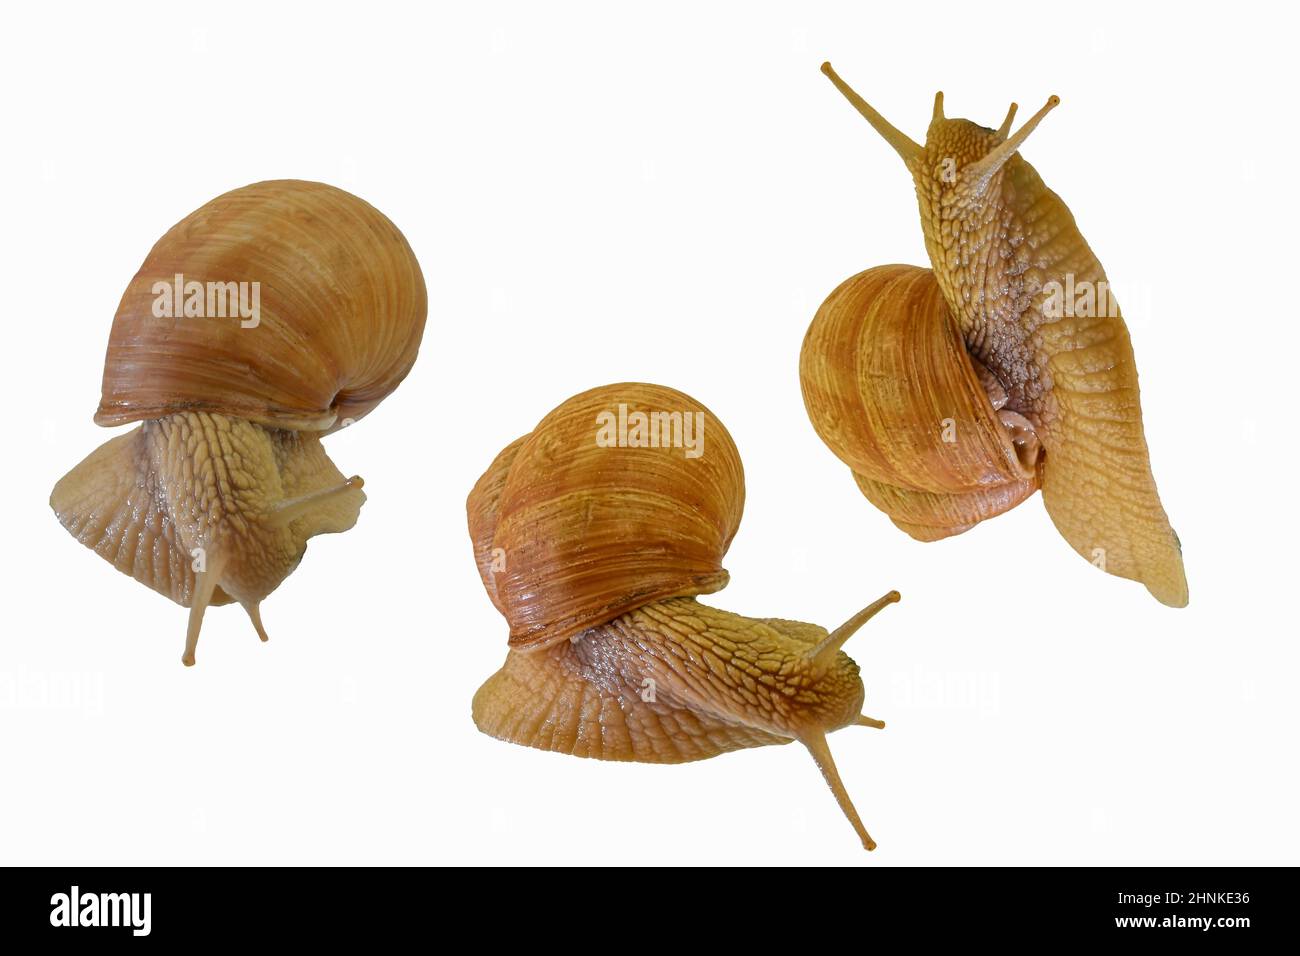 Set of three snails crawling on white background. Helix pomatia, collection of three  snails isolated on white background, side view and directly abov Stock Photo